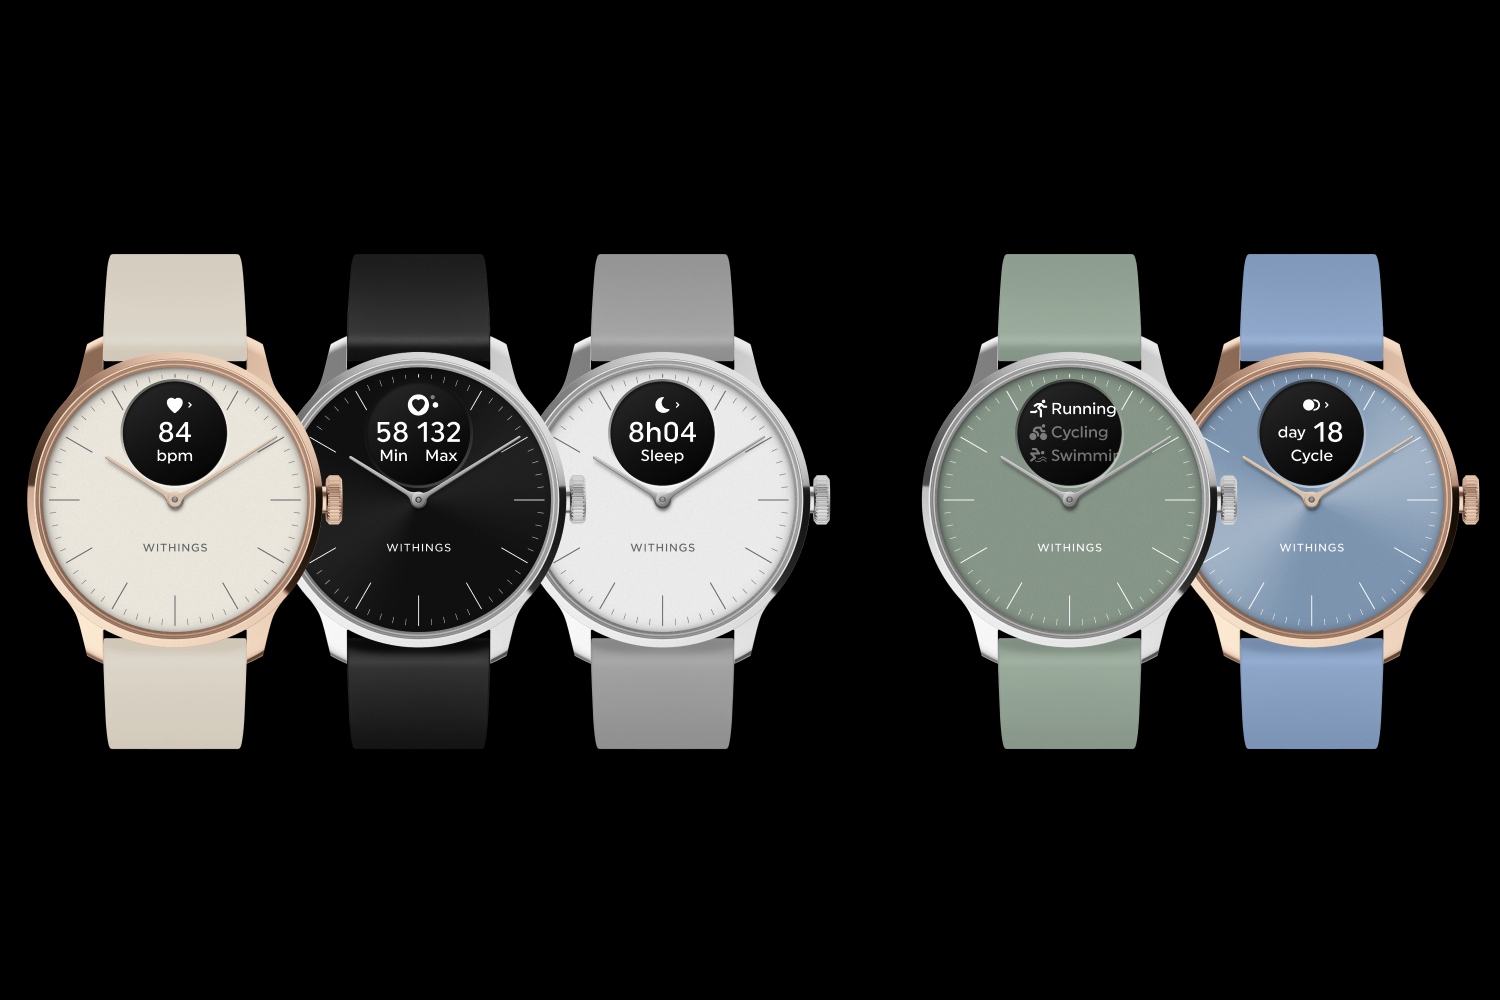 The range of Withings ScanWatch Light smartwatches.